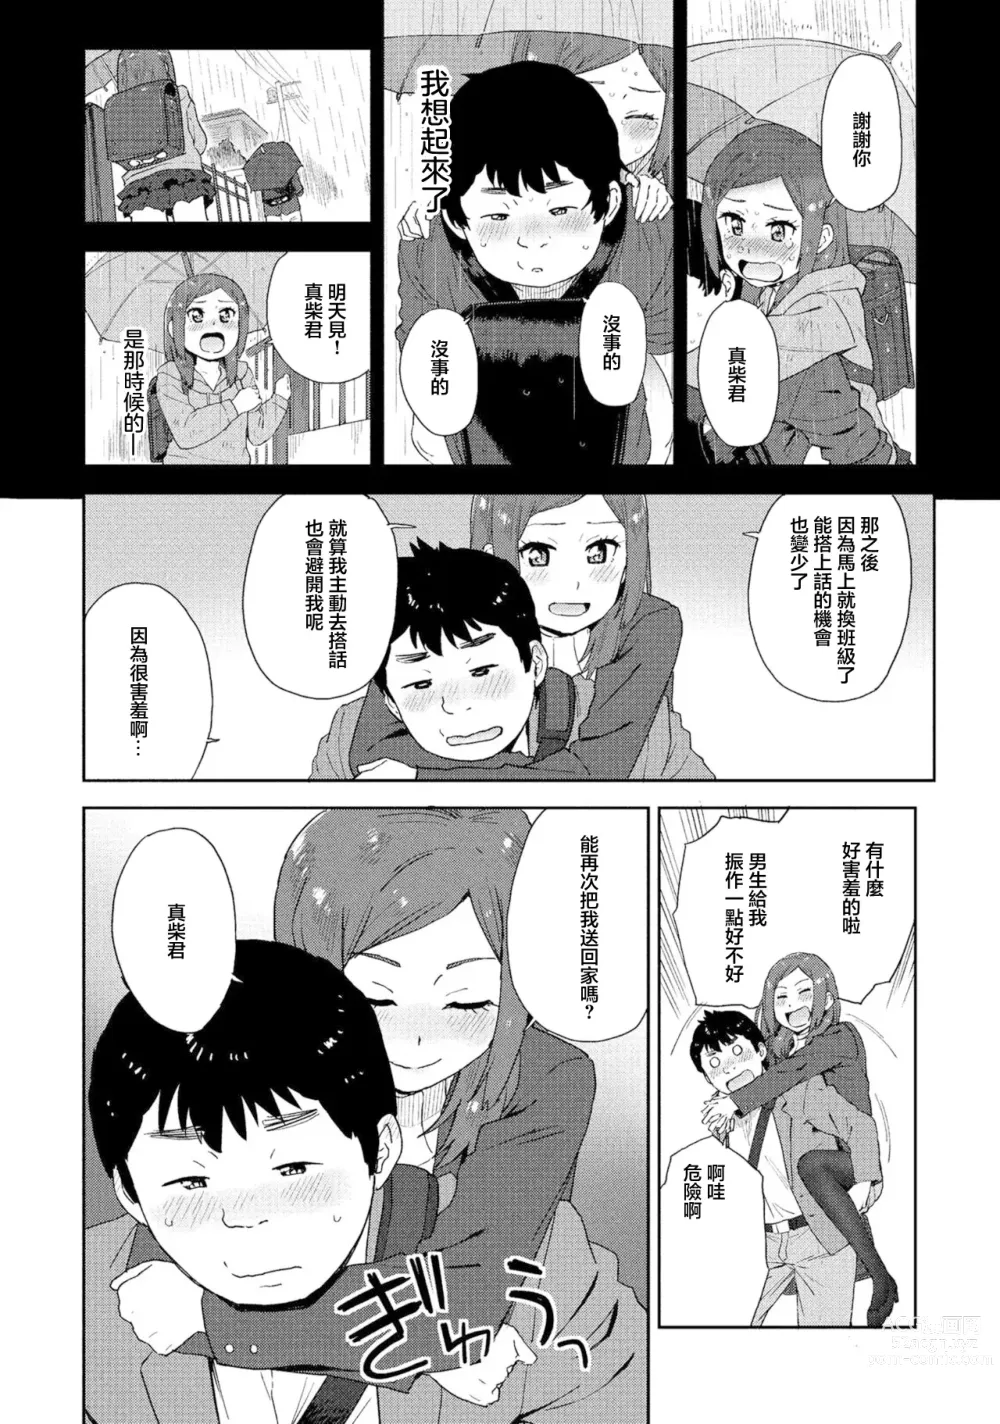 Page 10 of doujinshi 可靠依賴性